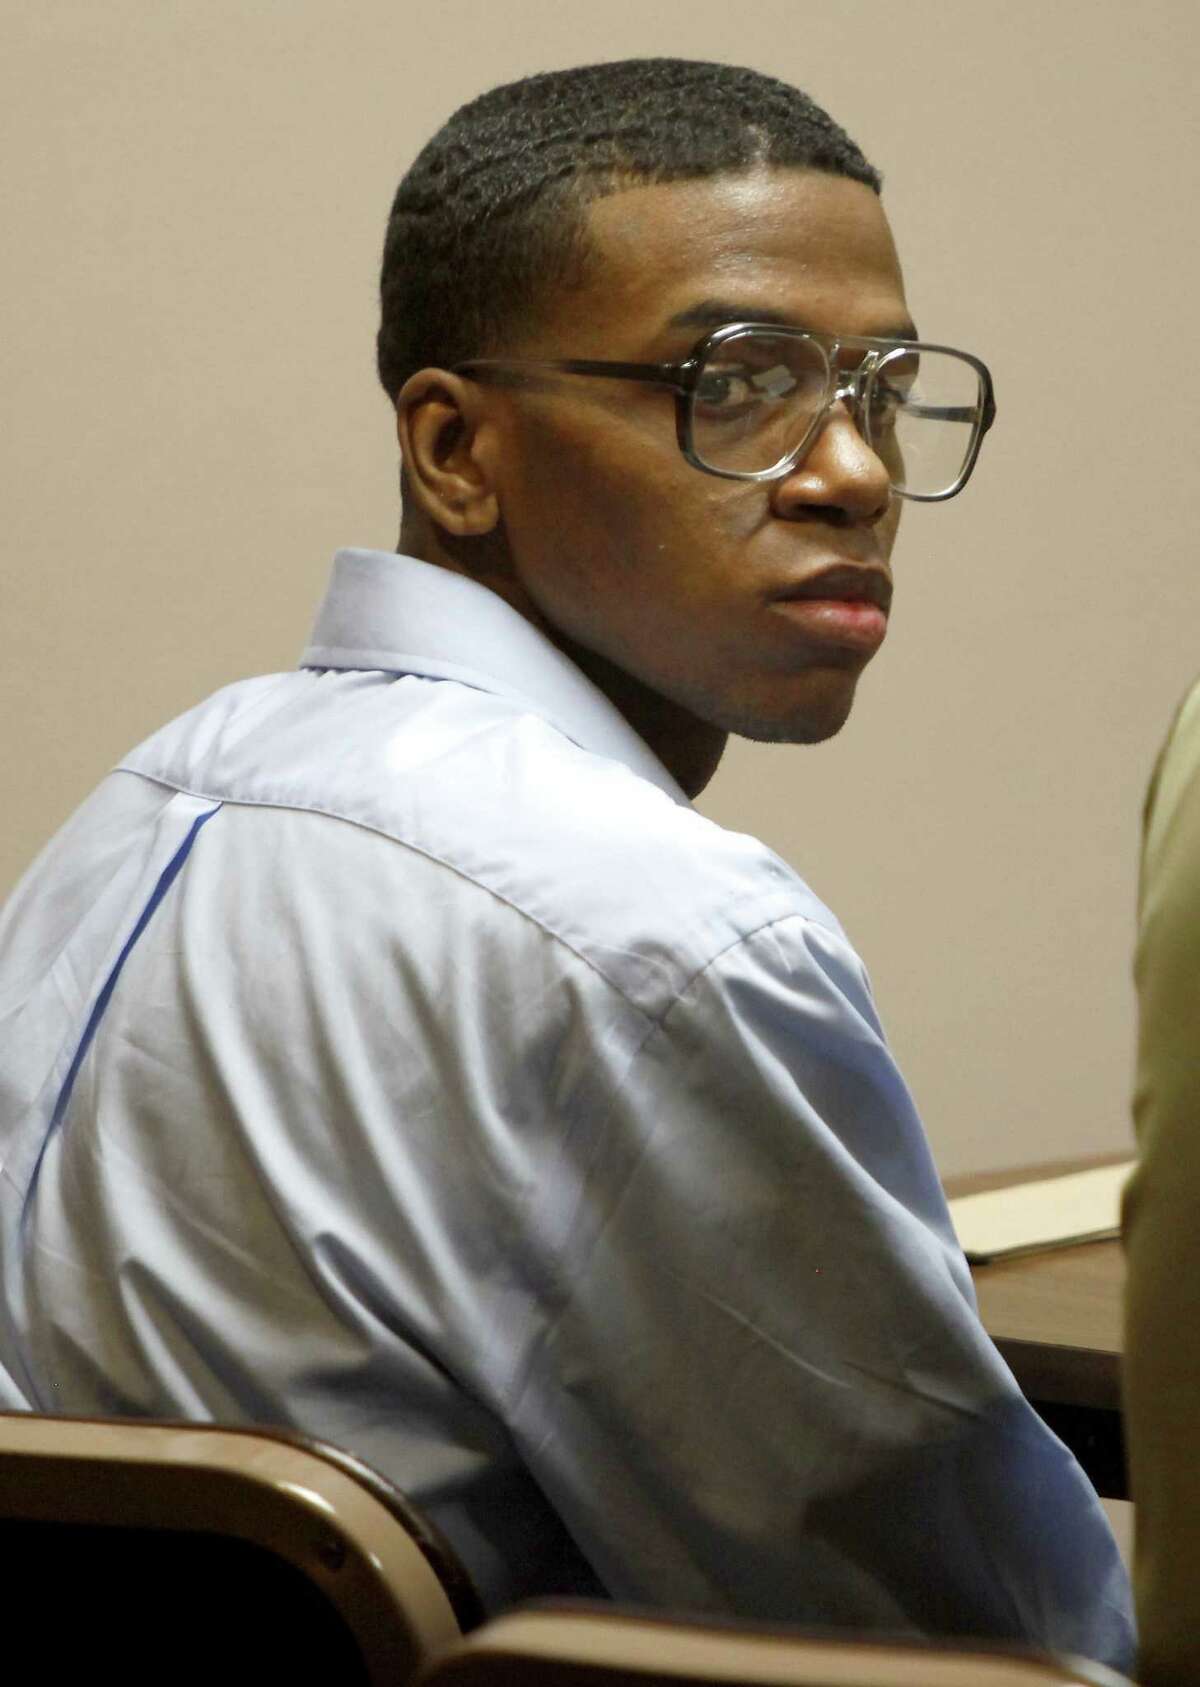 Lorenzo Leroy Thompson, 25, was convicted of capital murder in the death of Airman Vanessa Pitts, 25.